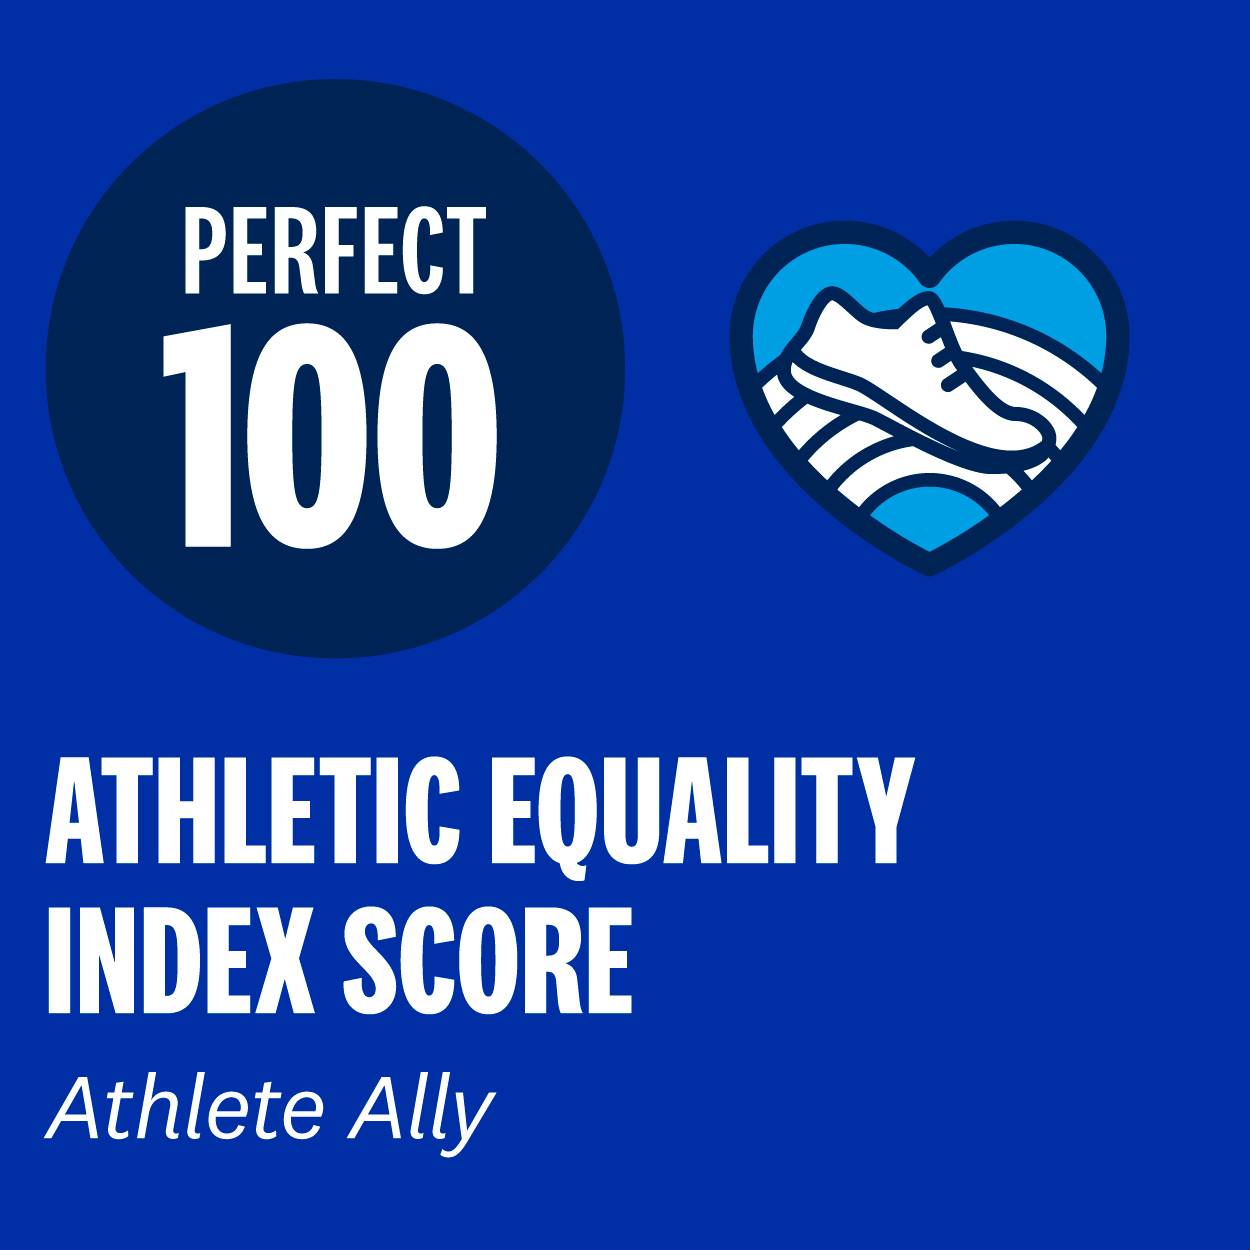 Perfect 100 Athletic Equality Index Score from Athlete Ally